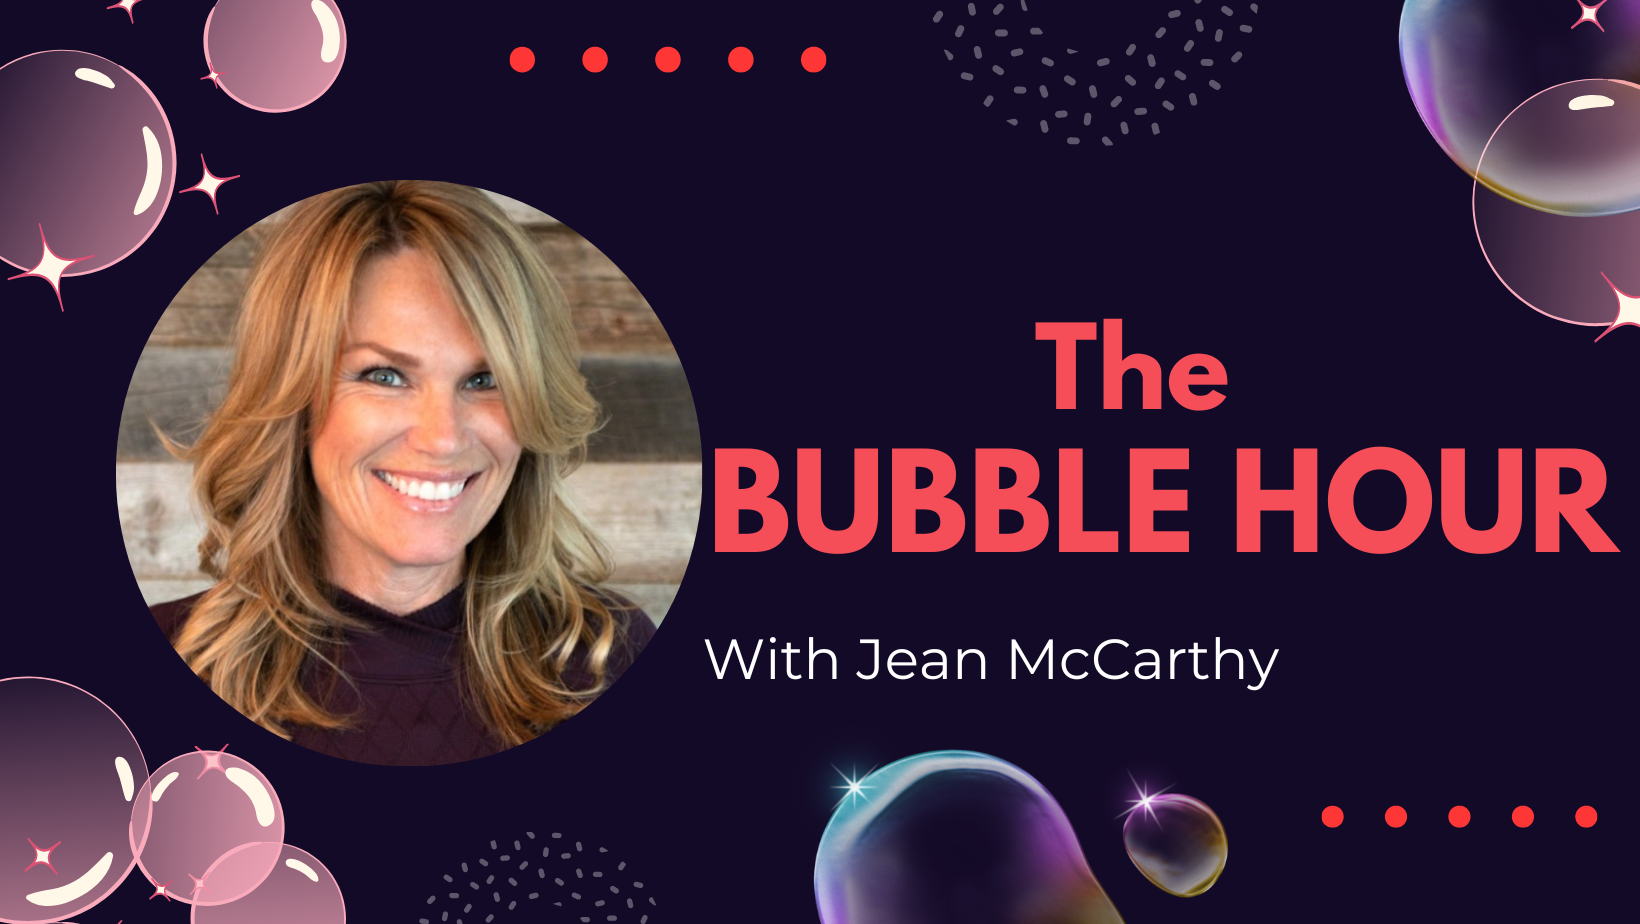 The Bubble Hour Podcast Review